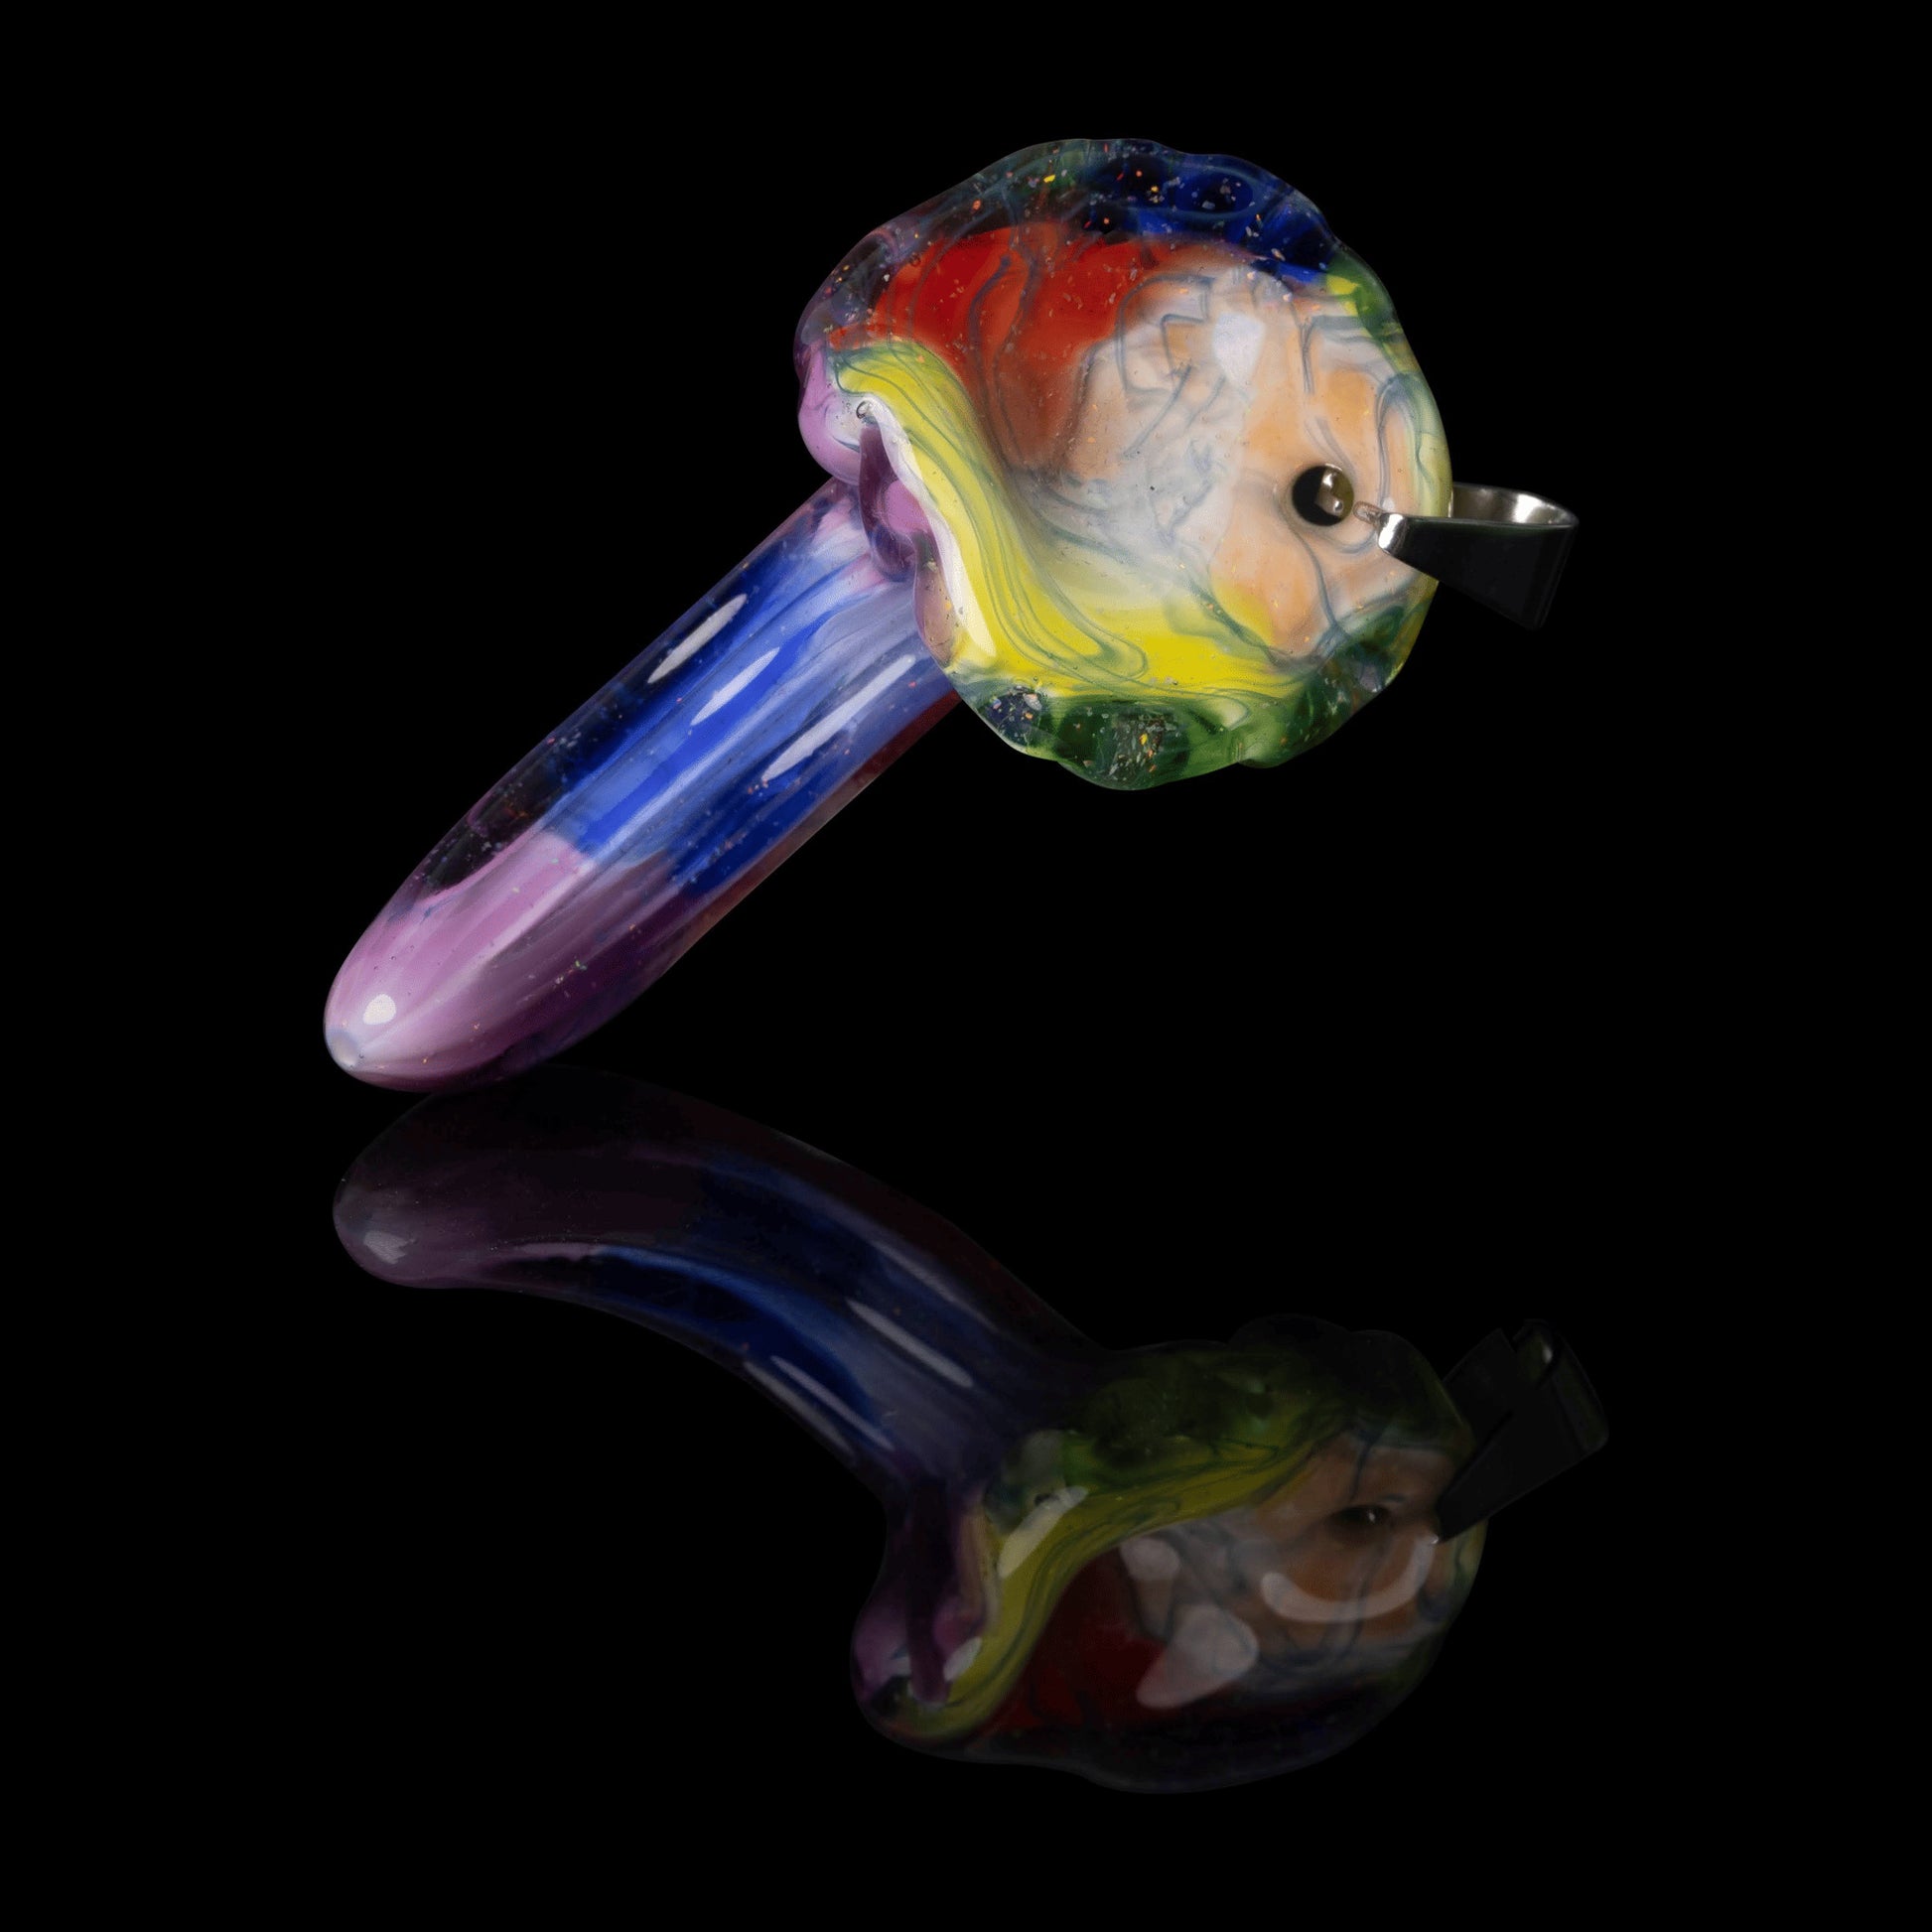 meticulously crafted glass pendant - Solo Mushroom Pendant (B) by Scomo Moanet (Scribble Season 2022)